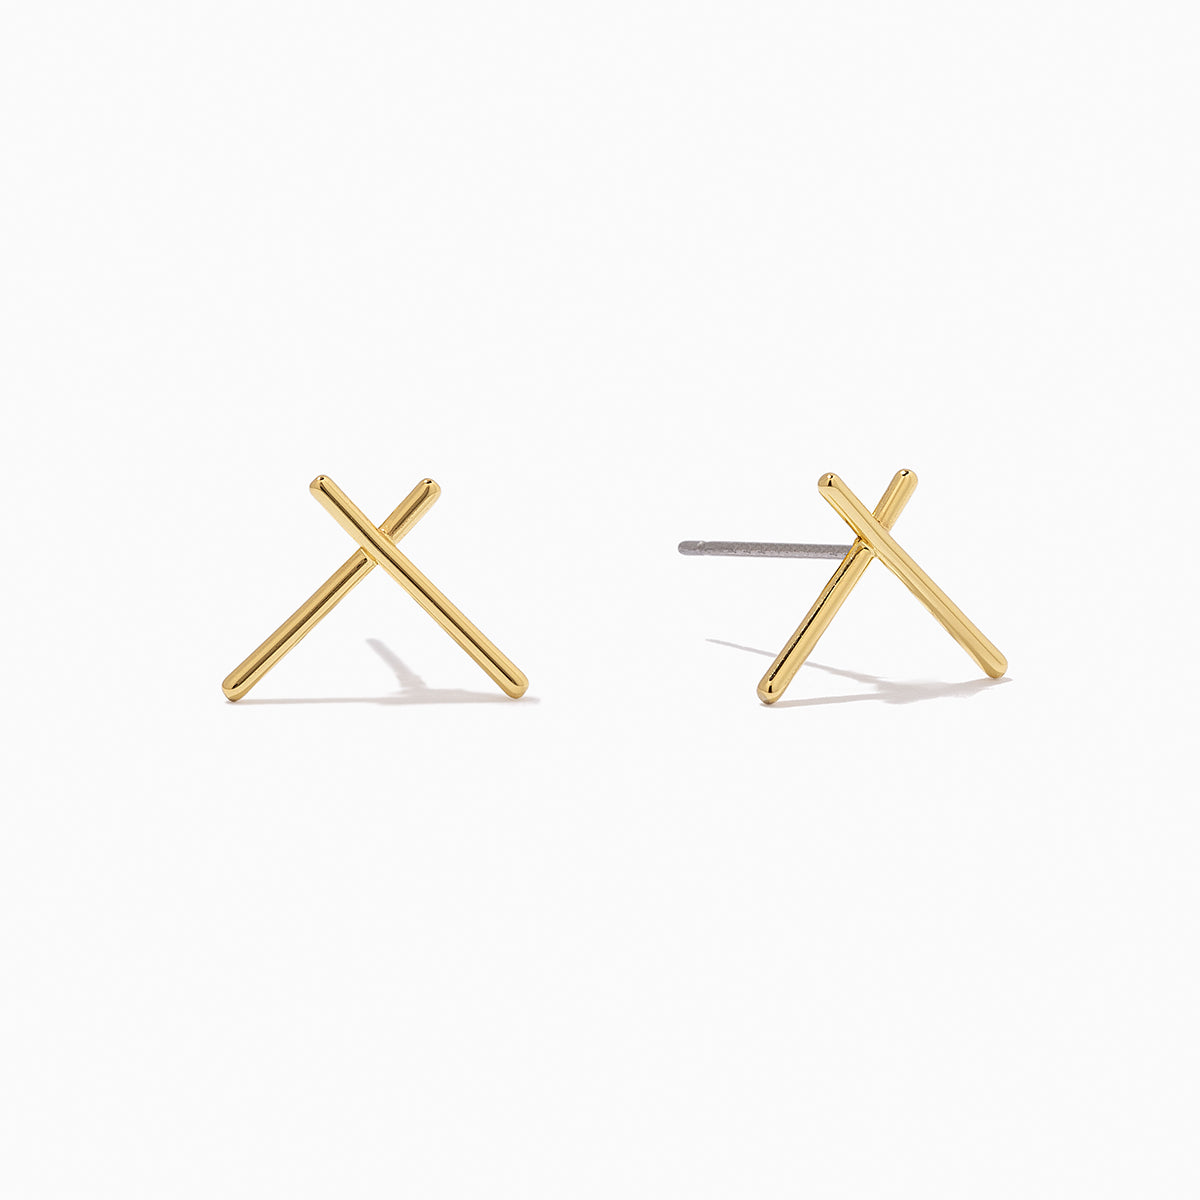 Criss Cross Earrings | Gold | Product Image | Uncommon James